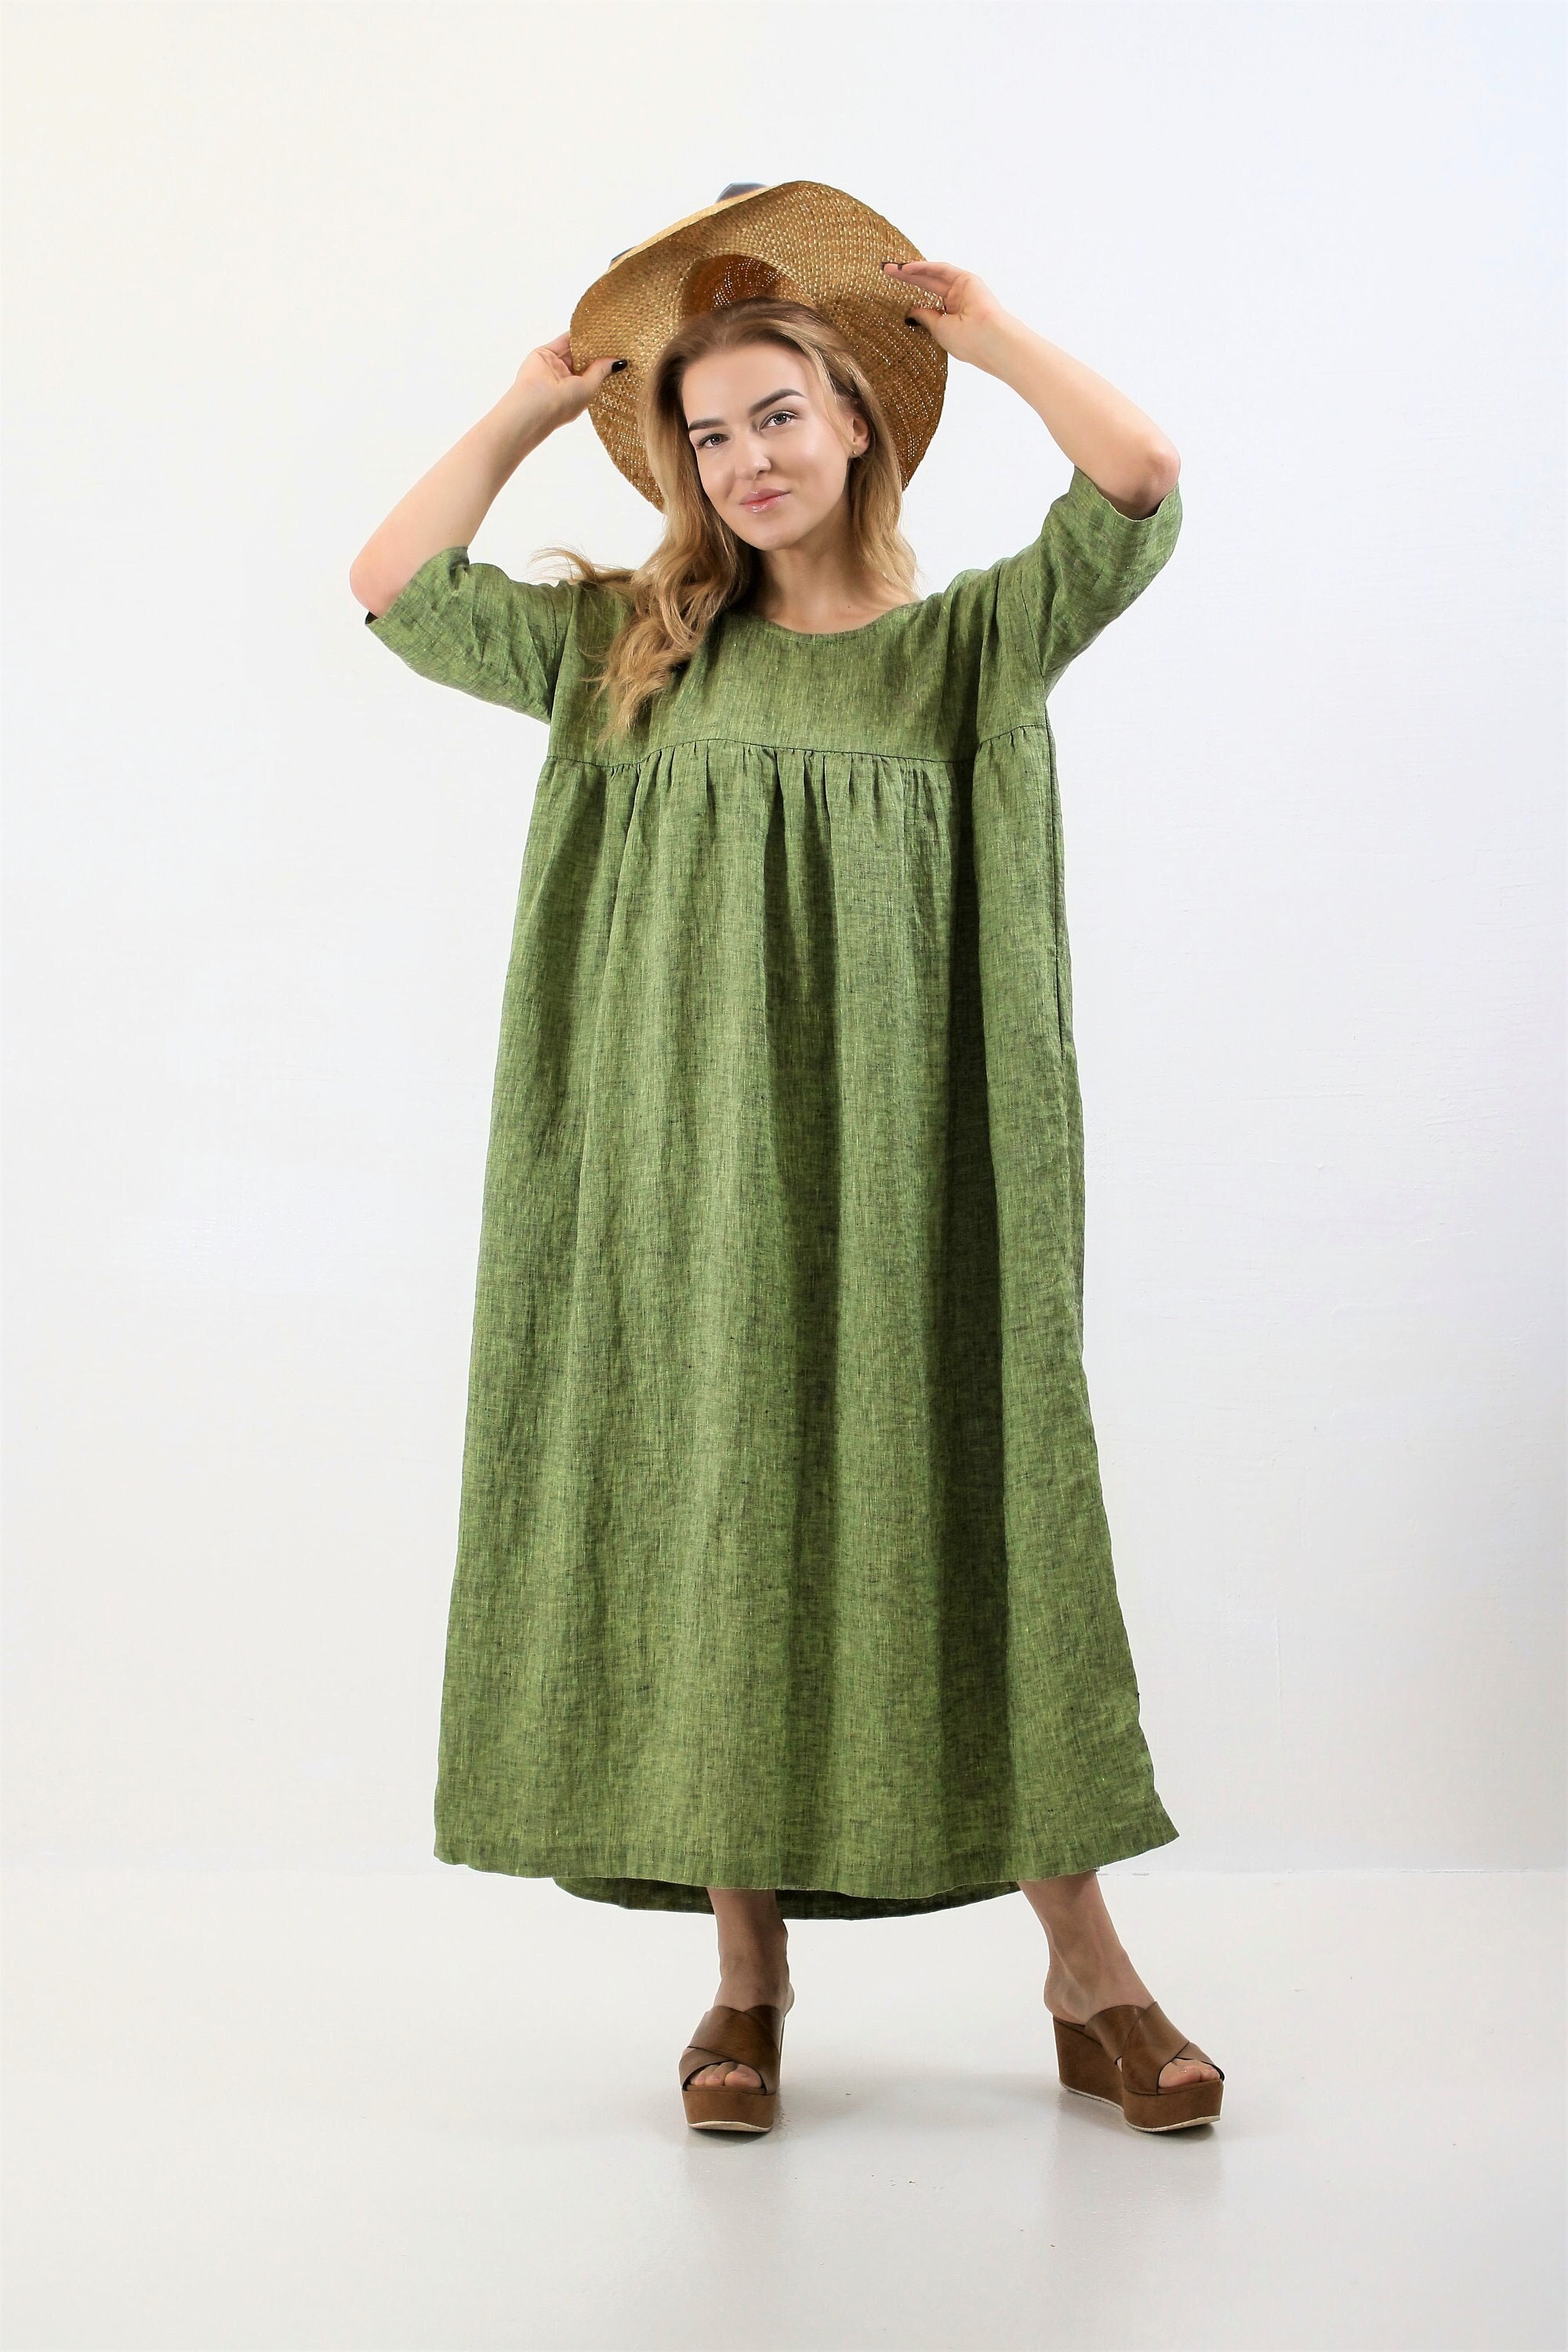 Linen Tunic Dress With Short Sleeves, Linen Tunic for Women, Plus